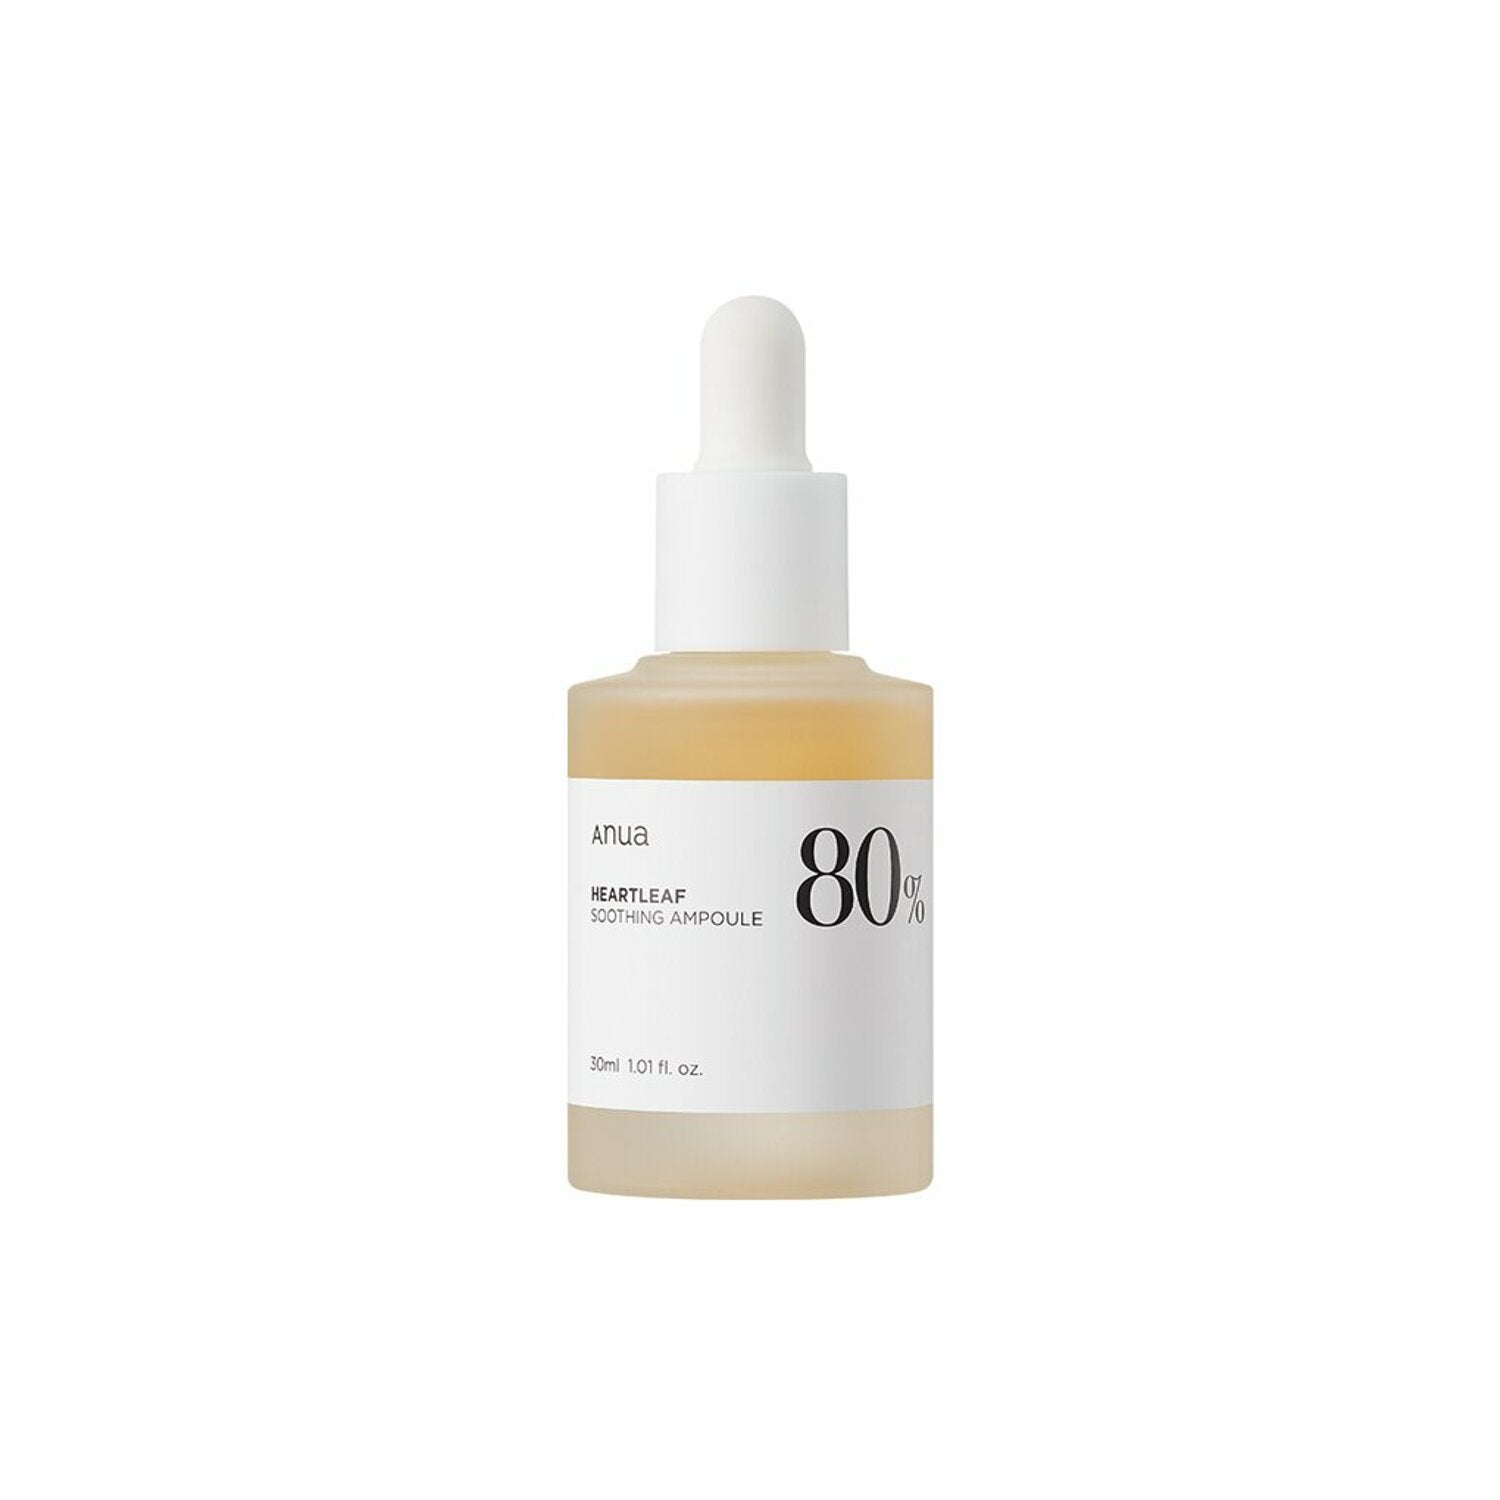 Anua Heartleaf 80% Soothing Ampoule 30mL - Kpop Wholesale | Seoufly